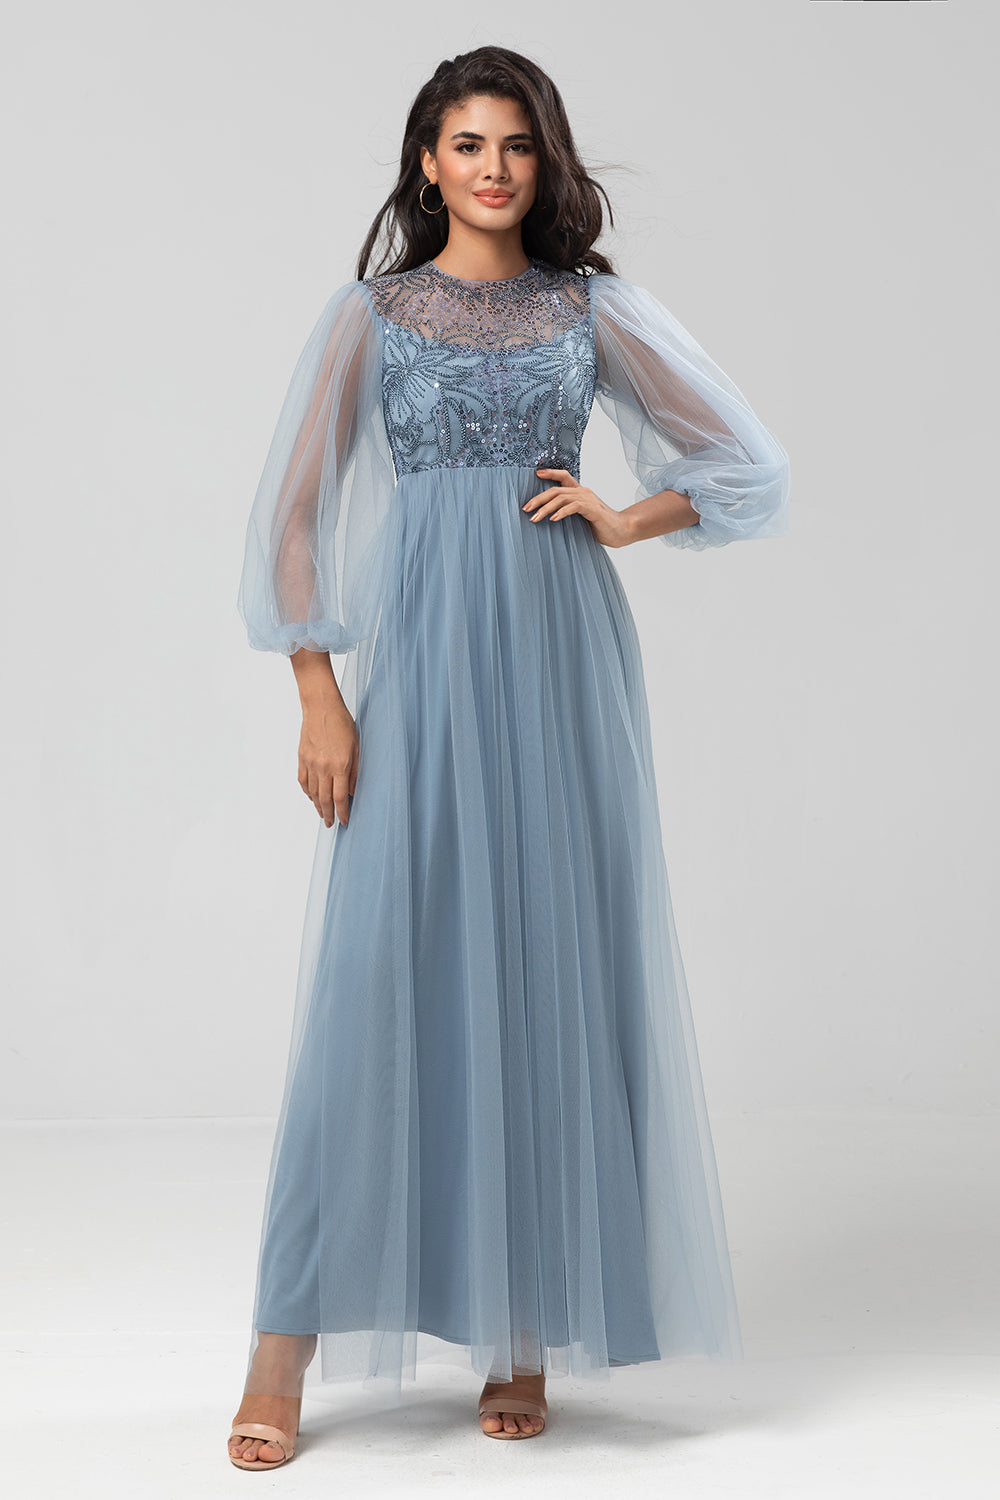 Chic Romantic A Line Jewel Neck Grey Blue Long Bridesmaid Dress with Long Sleeves